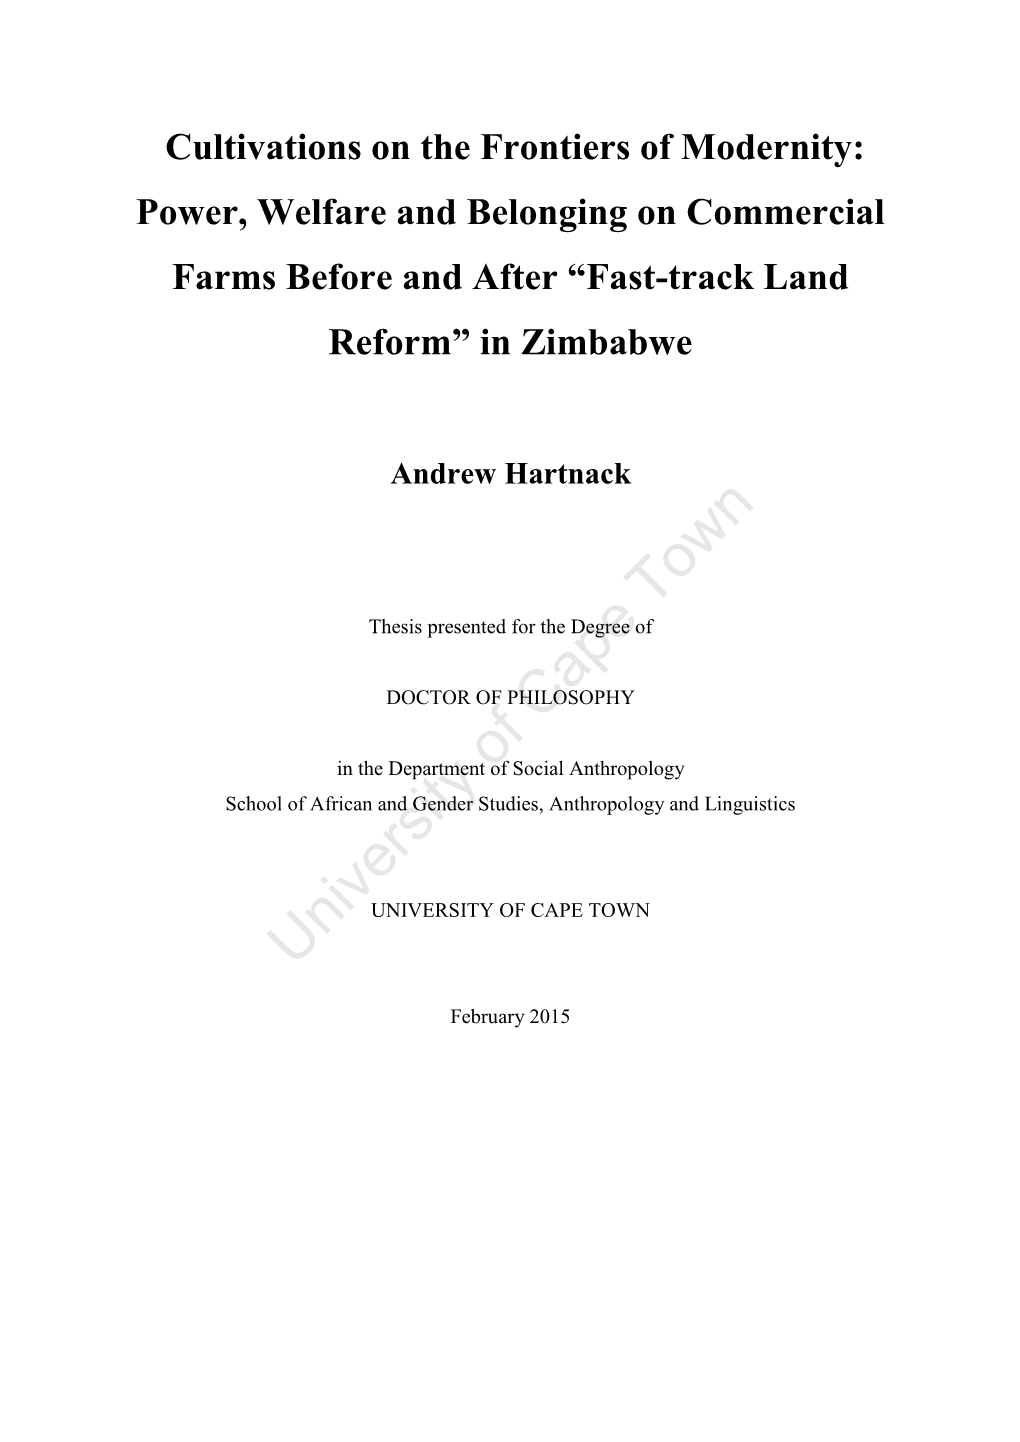 Power, Welfare and Belonging on Commercial Farms Before and After “Fast-Track Land Reform” in Zimbabwe